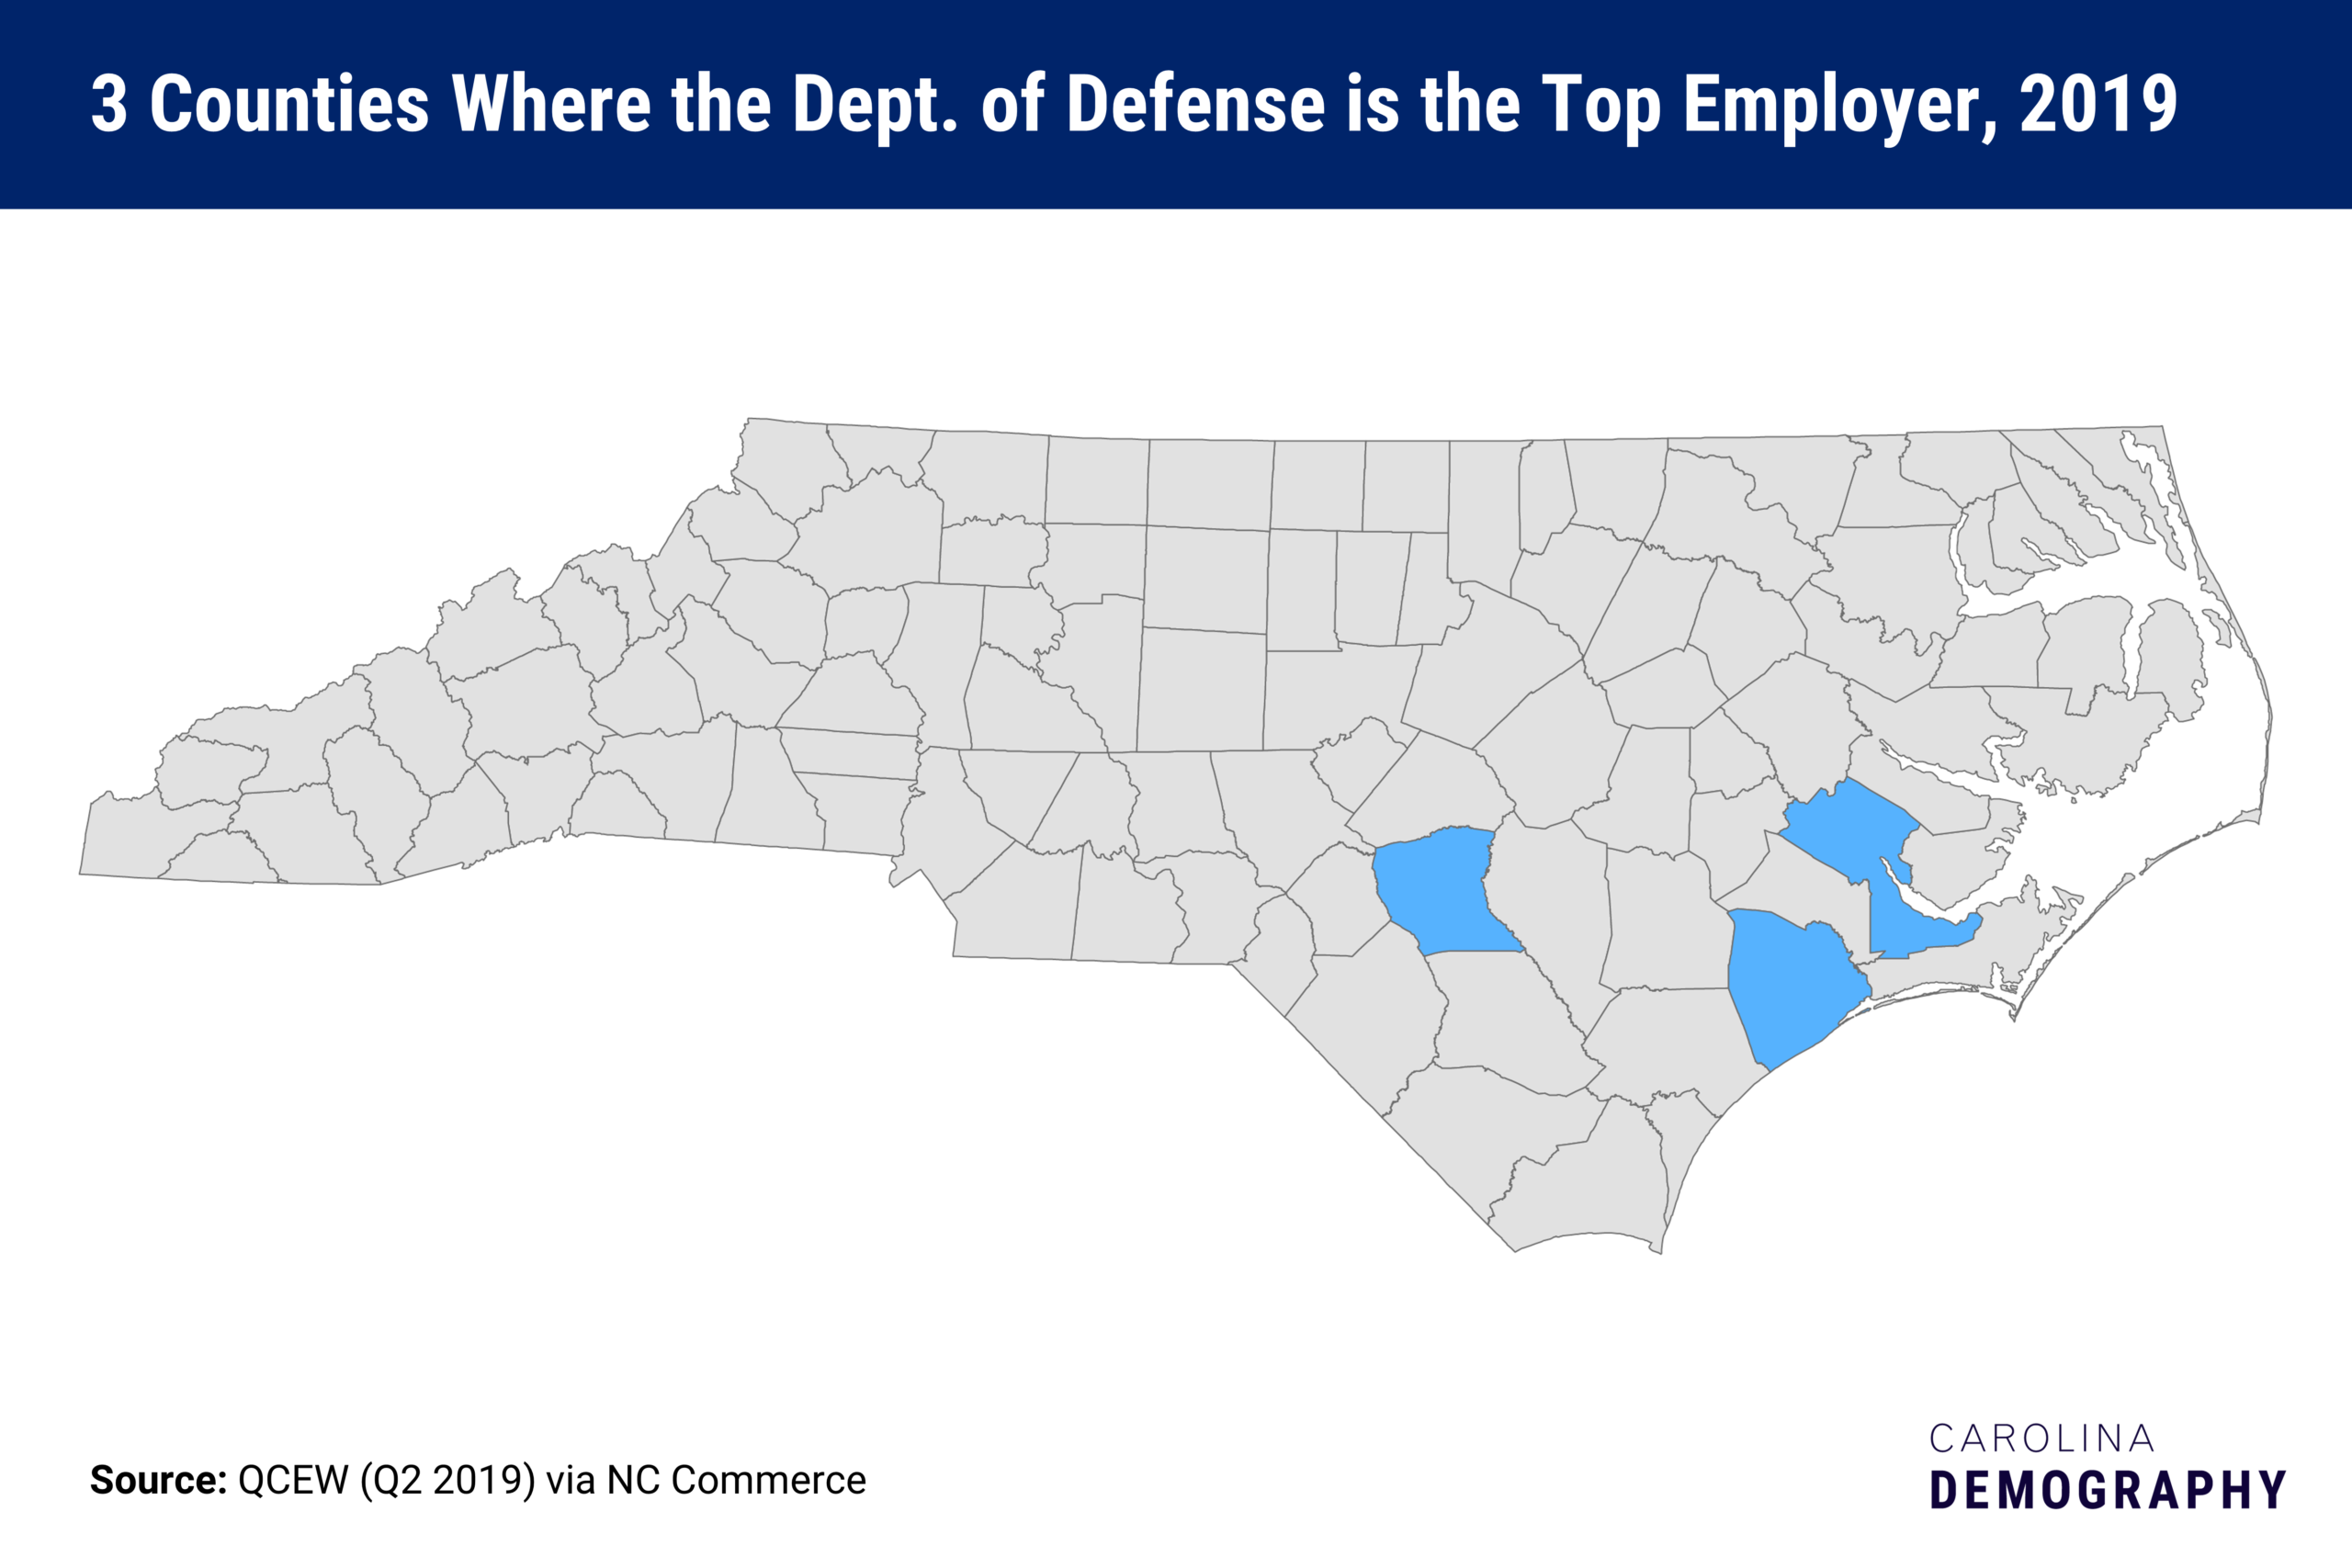 3 counties where the dept. of defense is the top employer, 2019